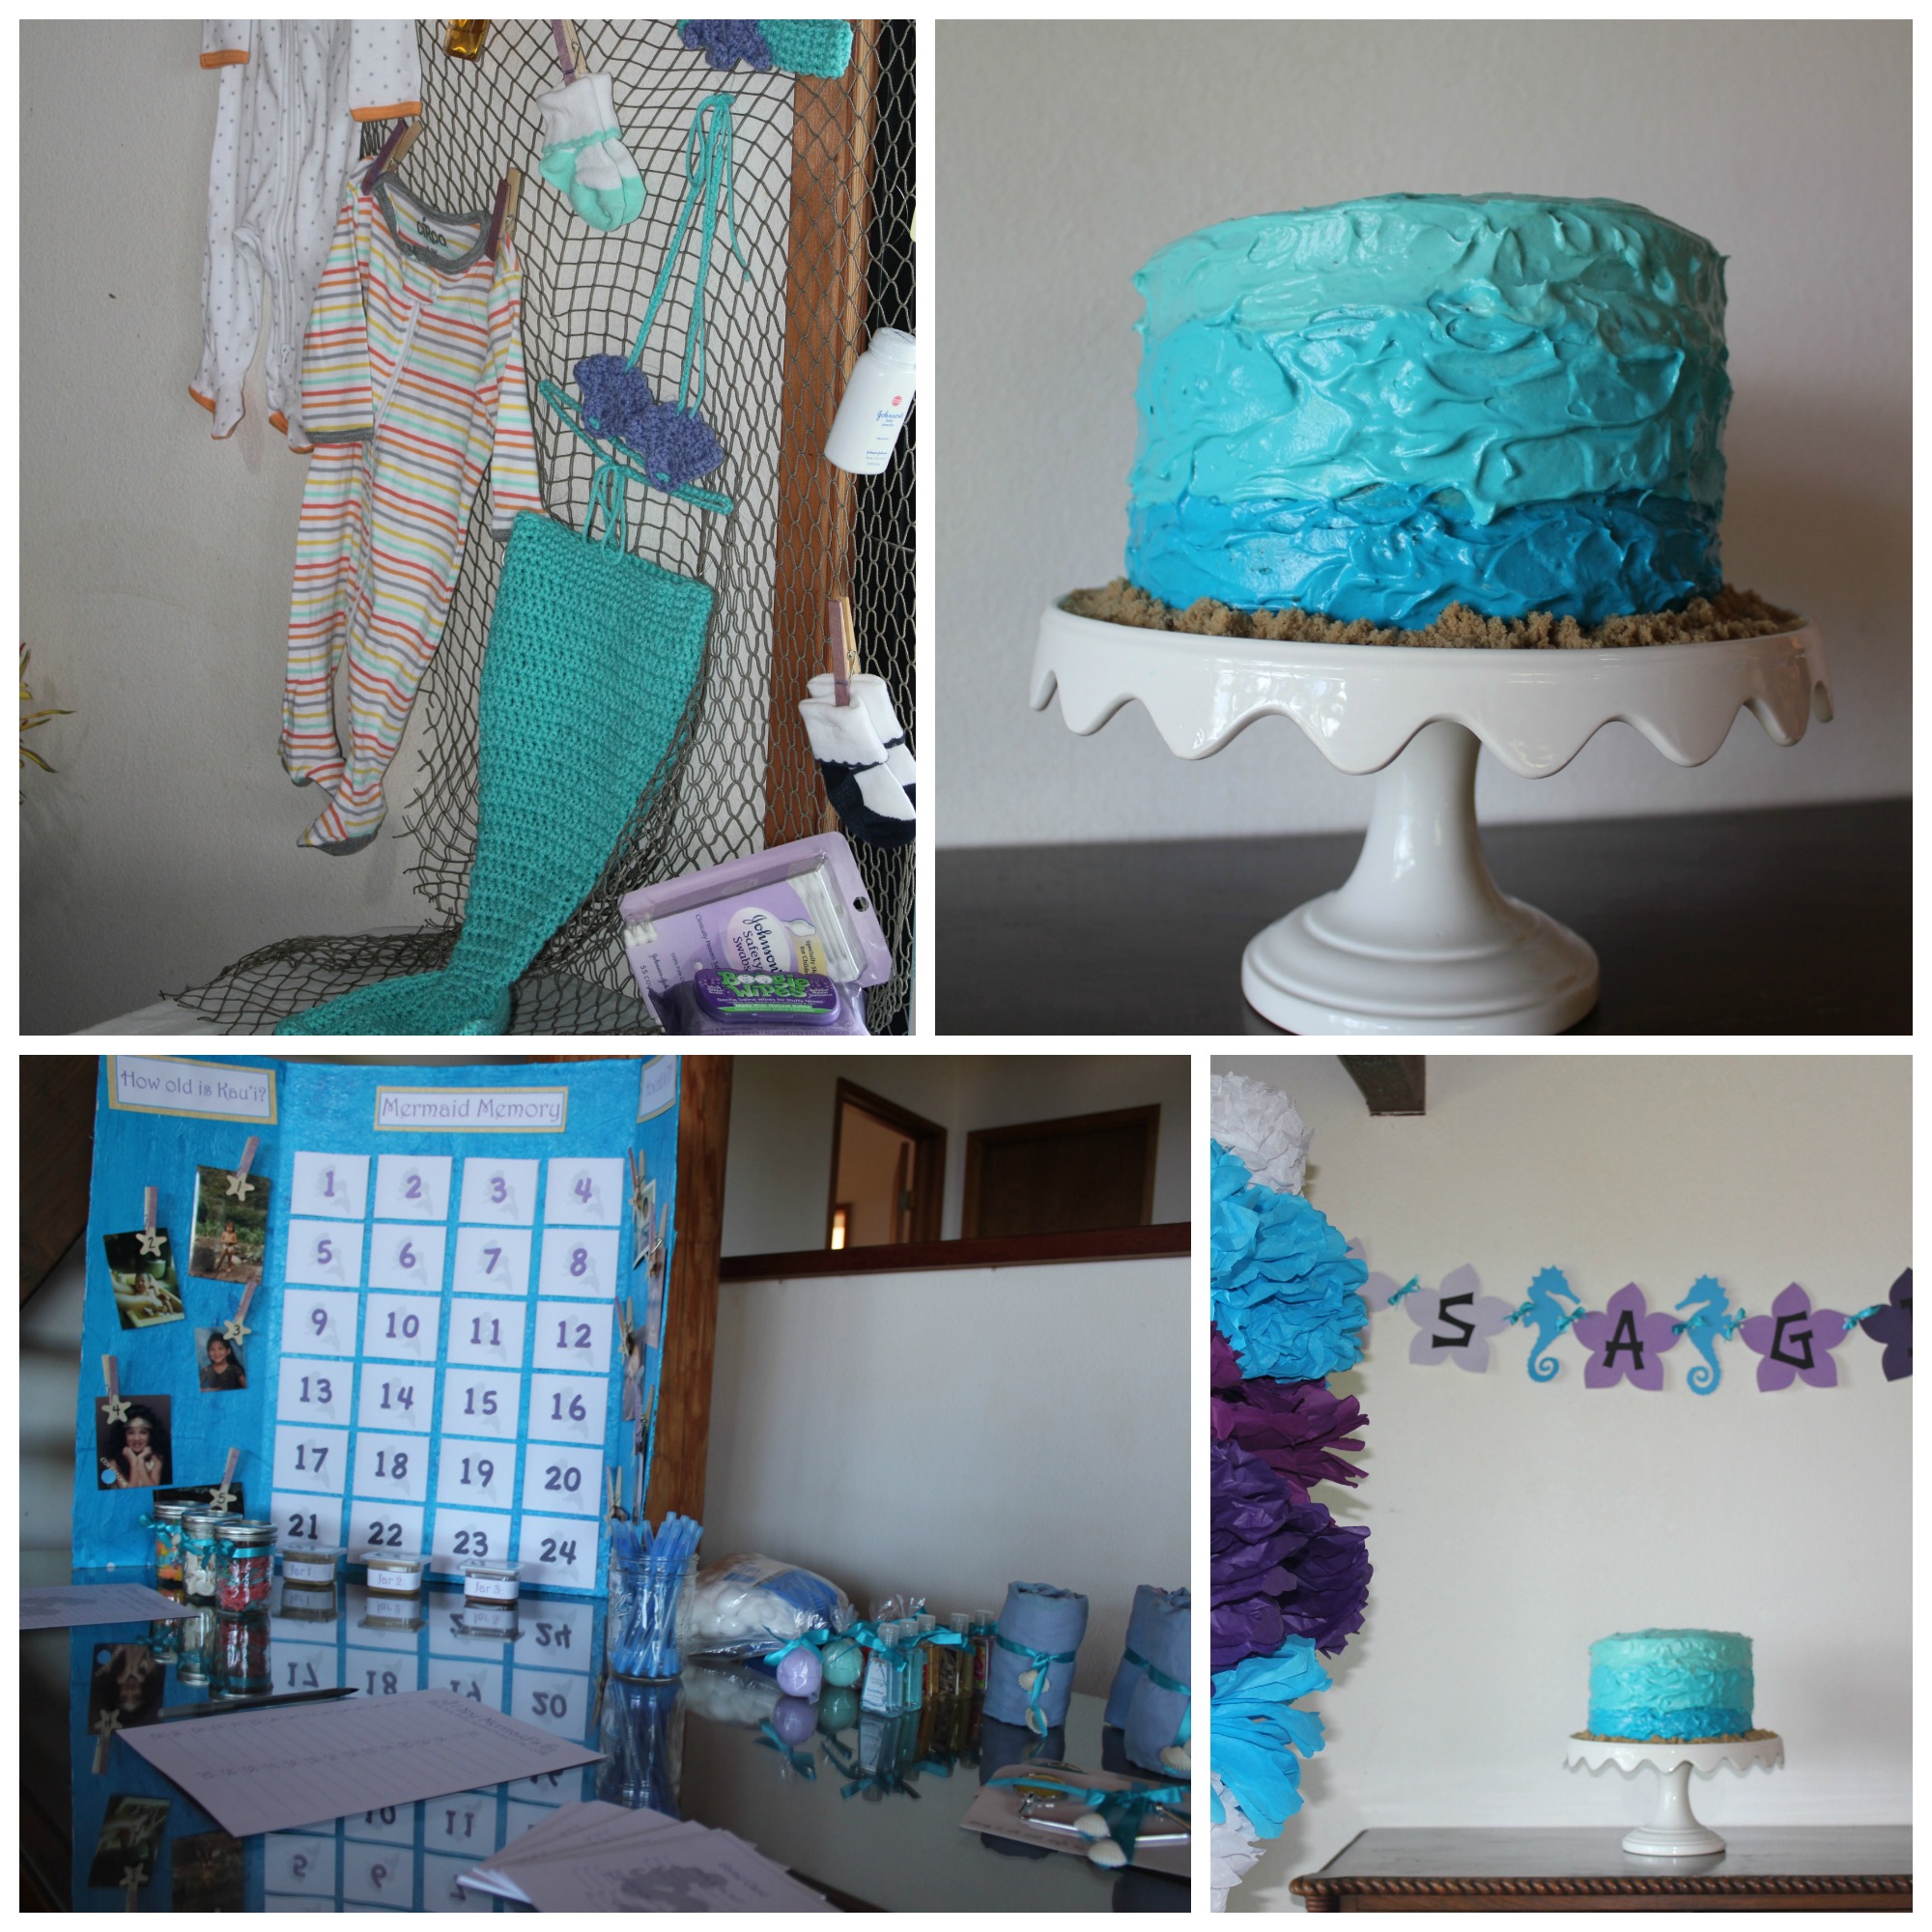 My Sister’s Mermaid Themed Baby Shower | Livin' the Mommy Life